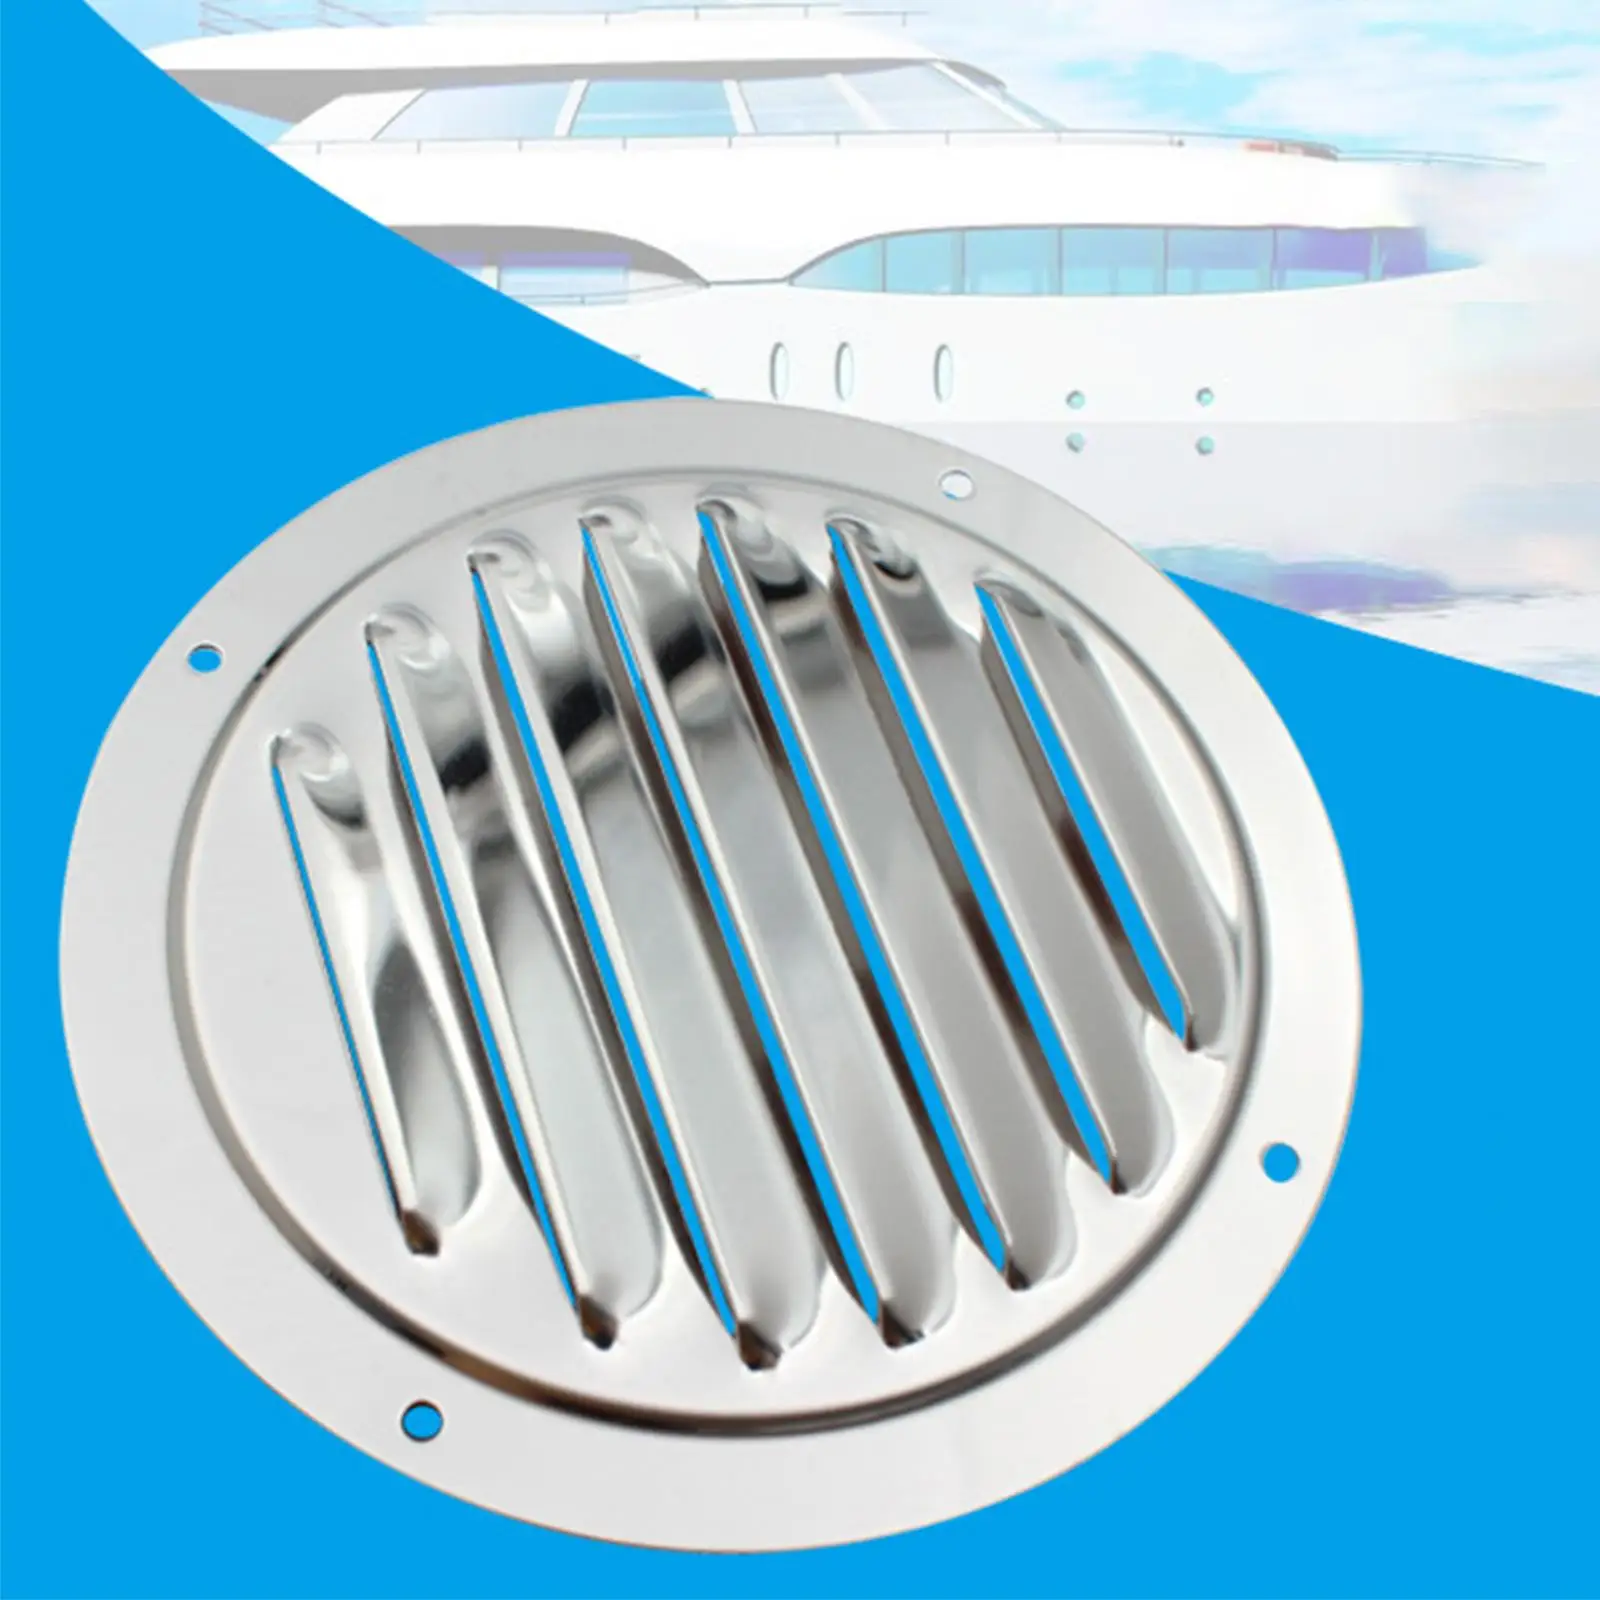 Air Vent Round Ventilation Grille Cover Boat Cabin Vents for Bus Outdoor Boat Car